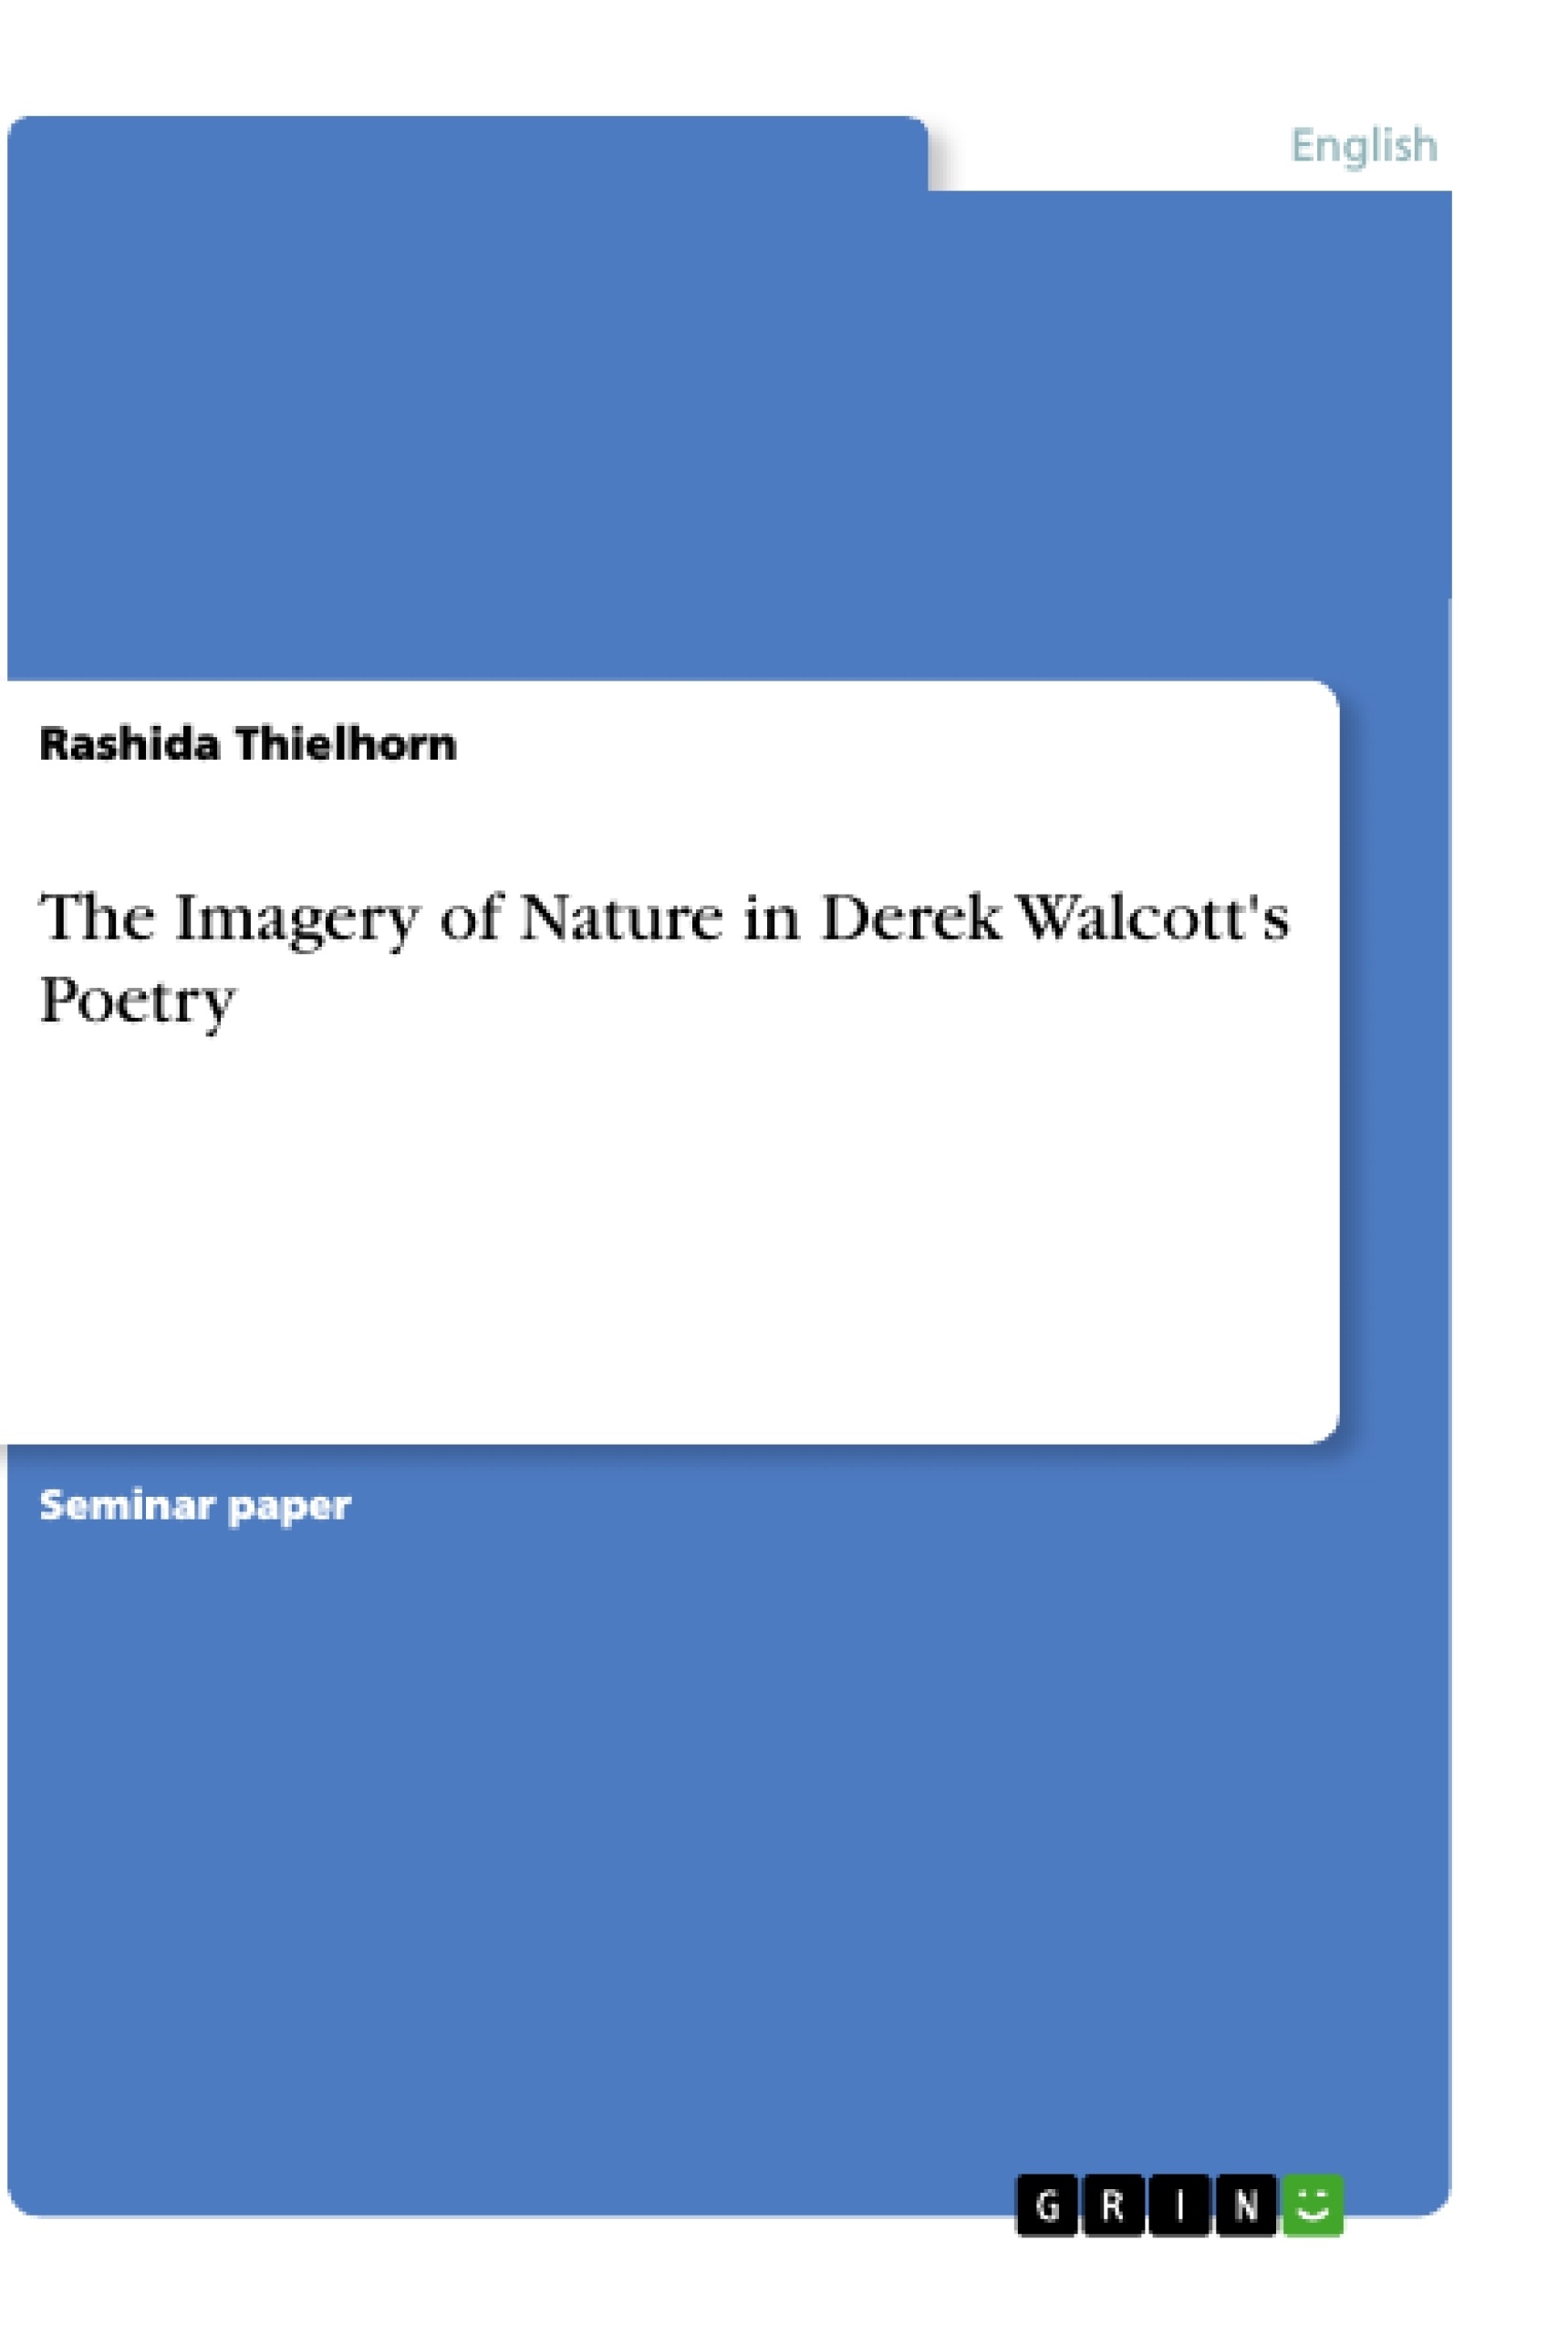 Title: The Imagery of Nature in Derek Walcott's Poetry